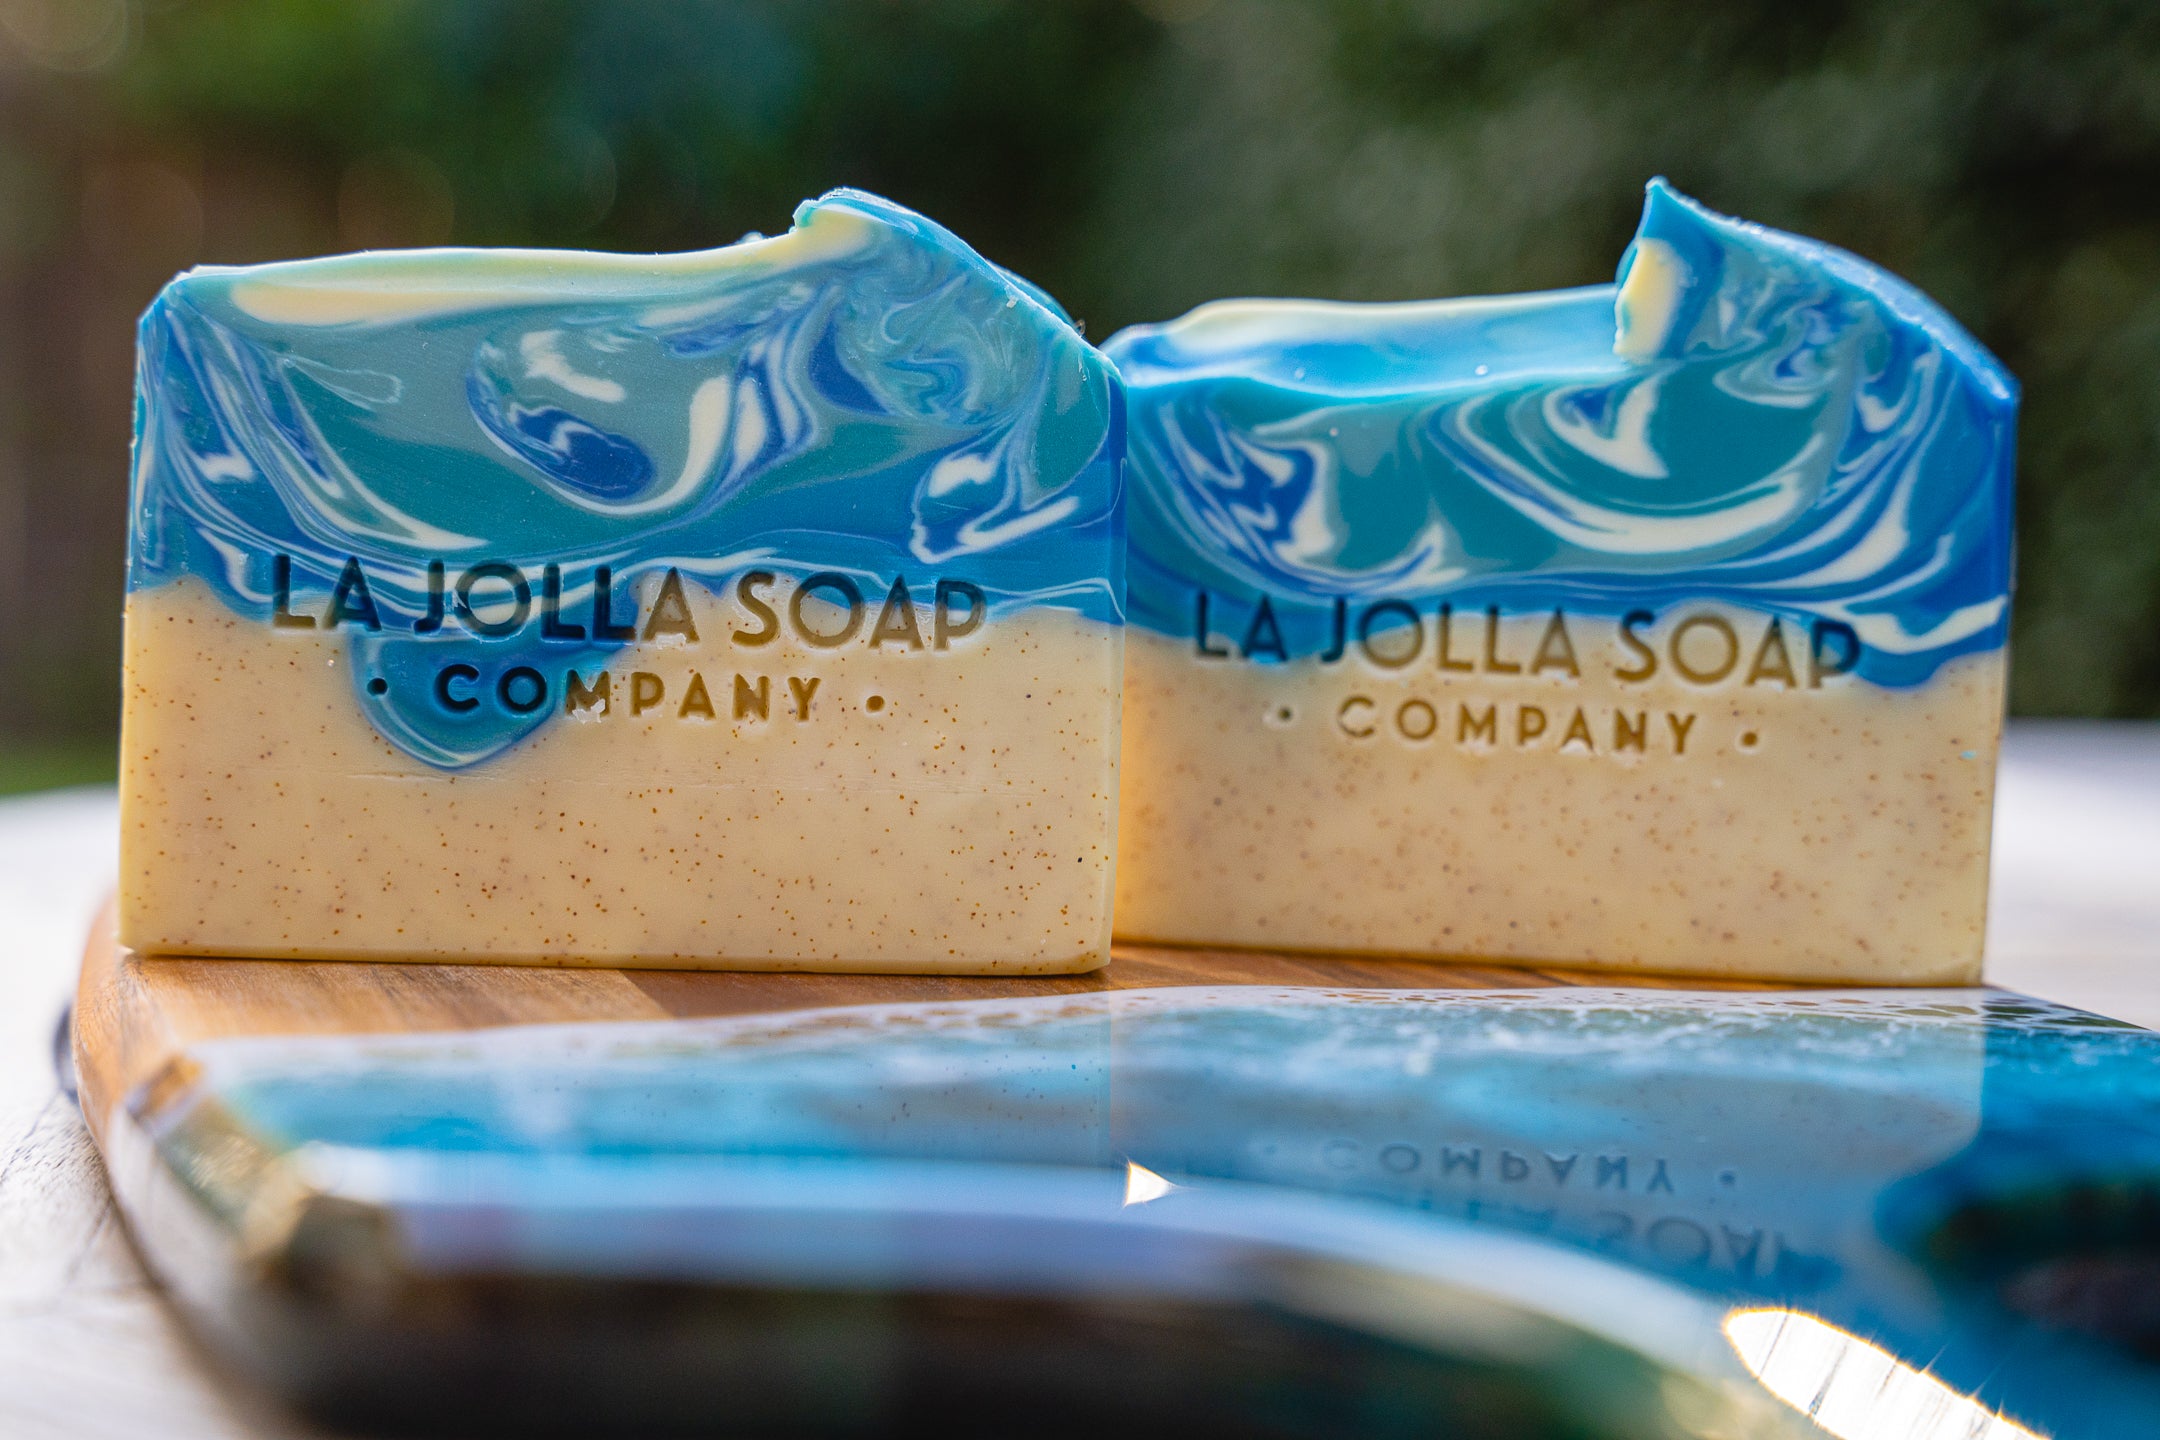 Artfully handcrafted with moisture rich oils and butters. Inspired by the ocean waves crashing along the cove. The whirl of blue colors tumbling with peaks of white foam. The seashore is sprinkled with finely ground walnut shell which lend some exfoliation. The scent is unisex, uplifting and fun with fresh marine notes, sea cypress, twists of citrus and a touch of coconut cream. 